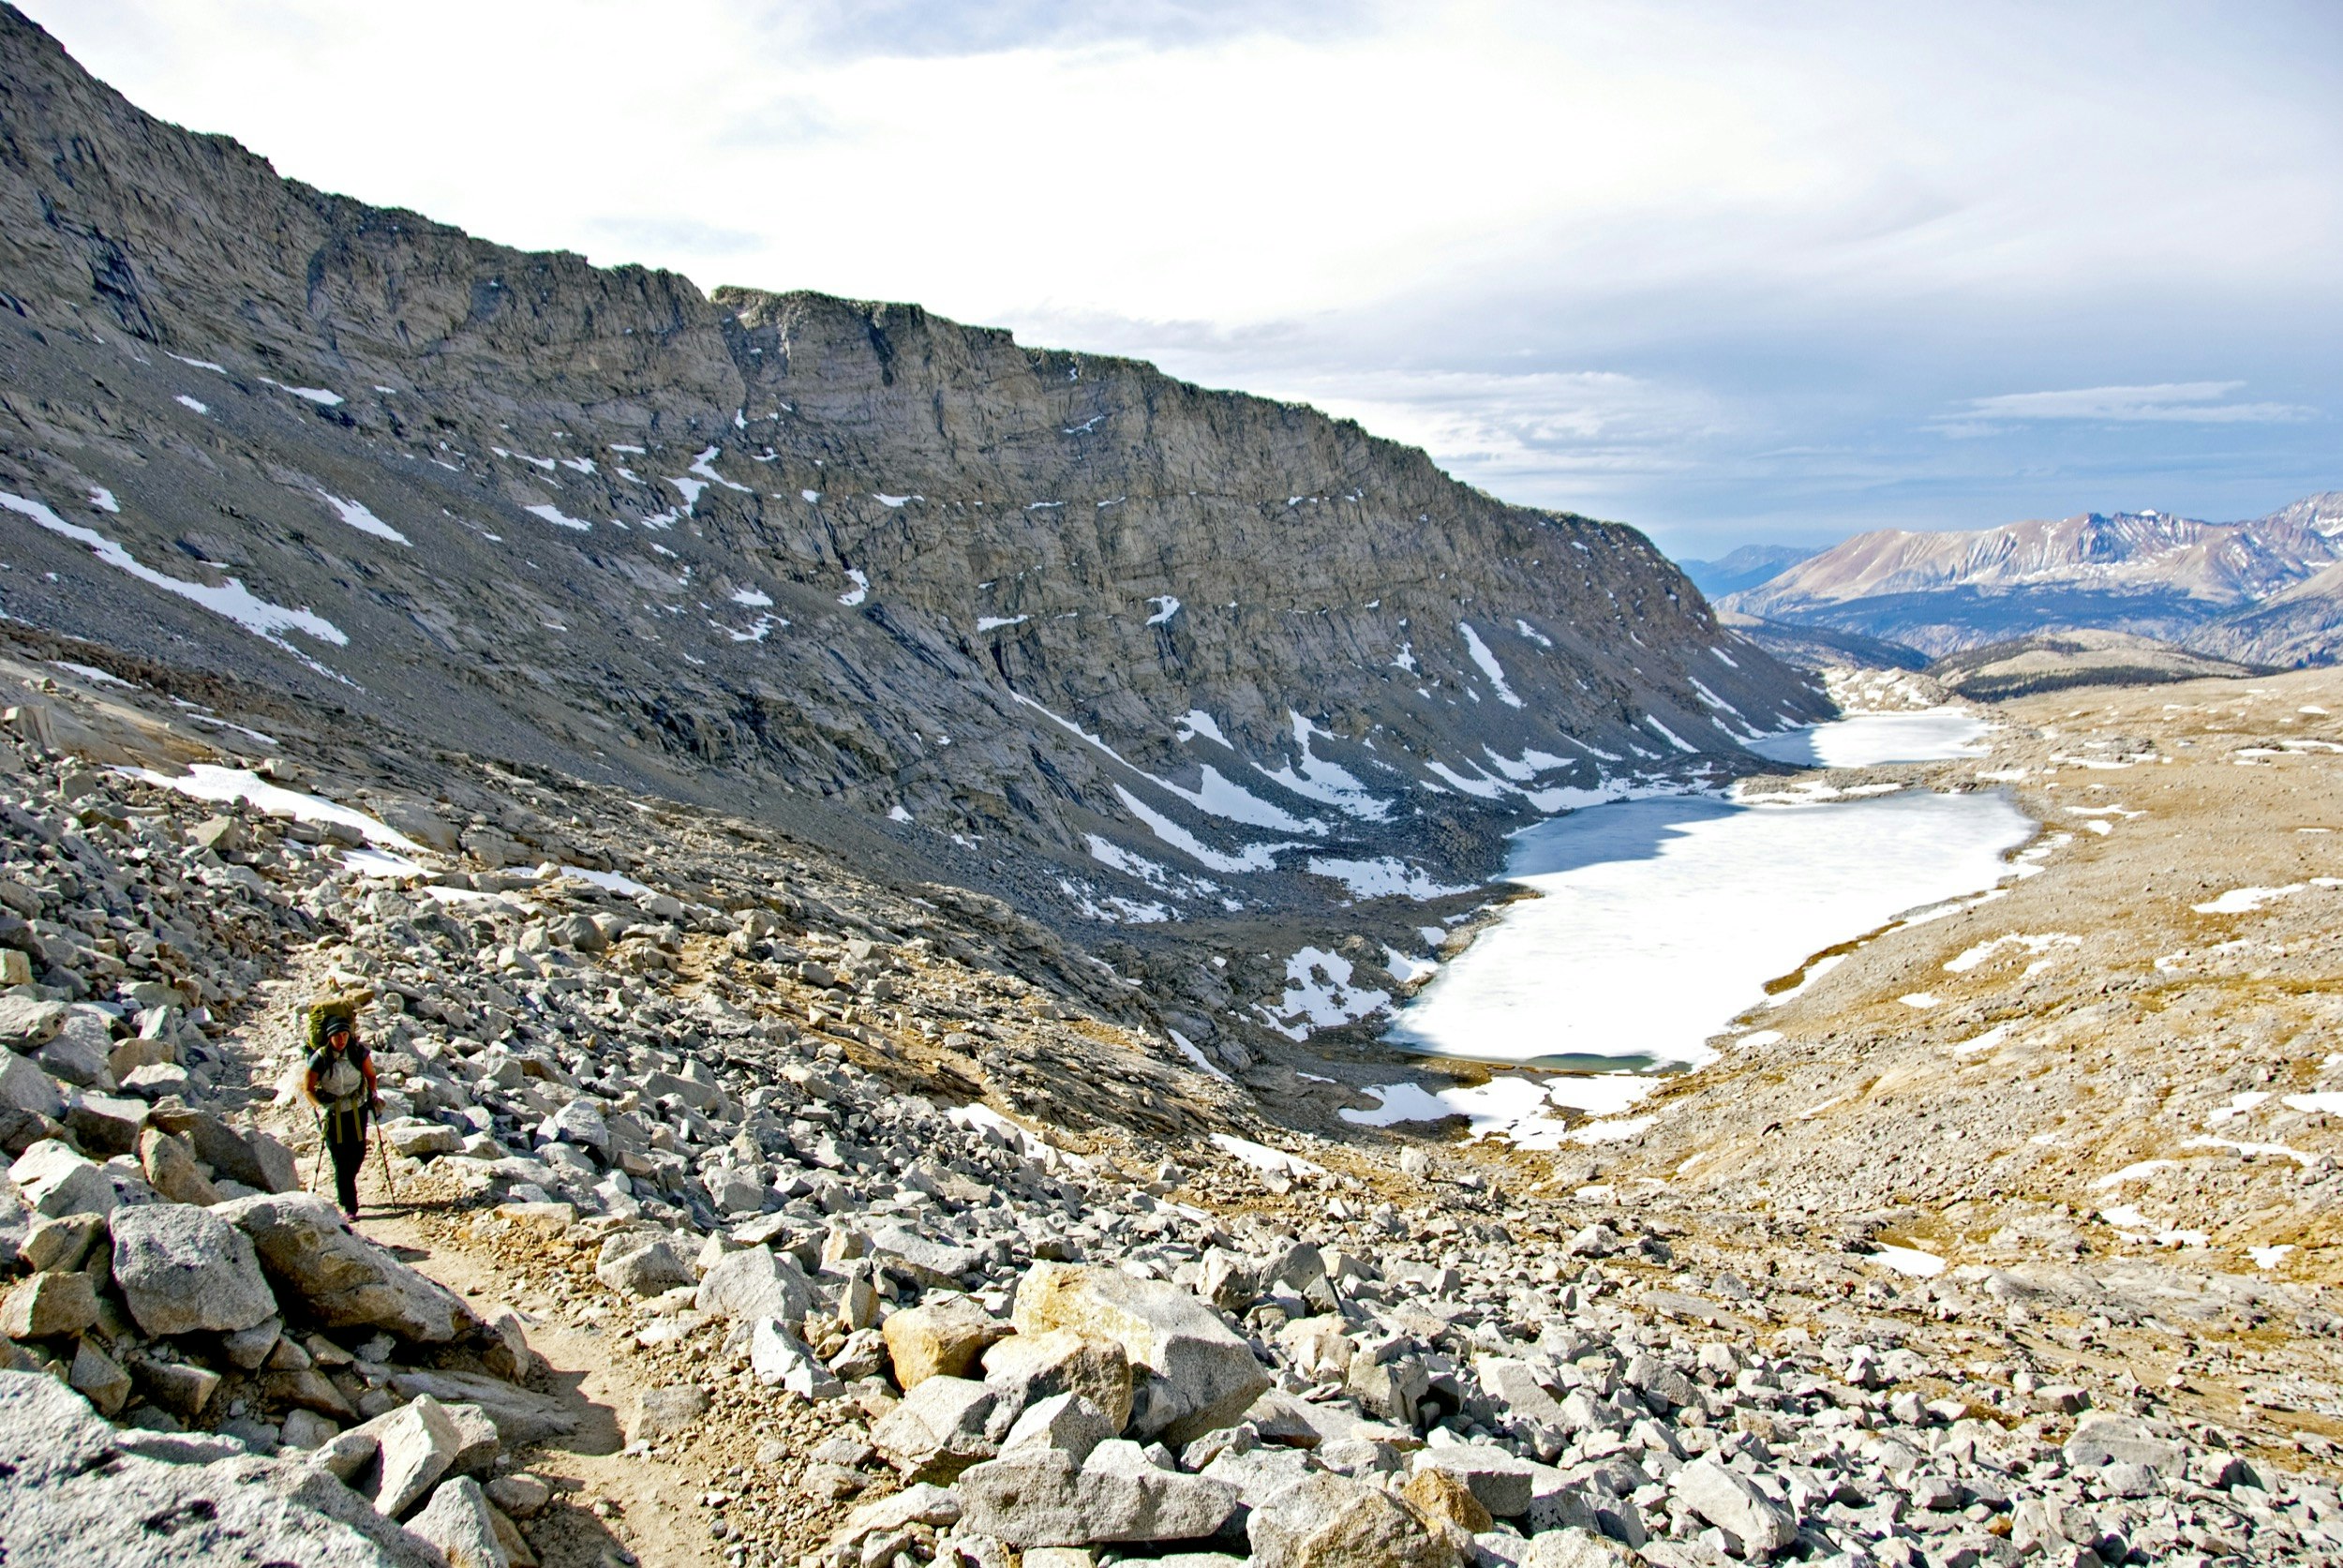 A man walks through a rocky landscape on the John Muir Trail in California's Sierra Nevada among patches of snow